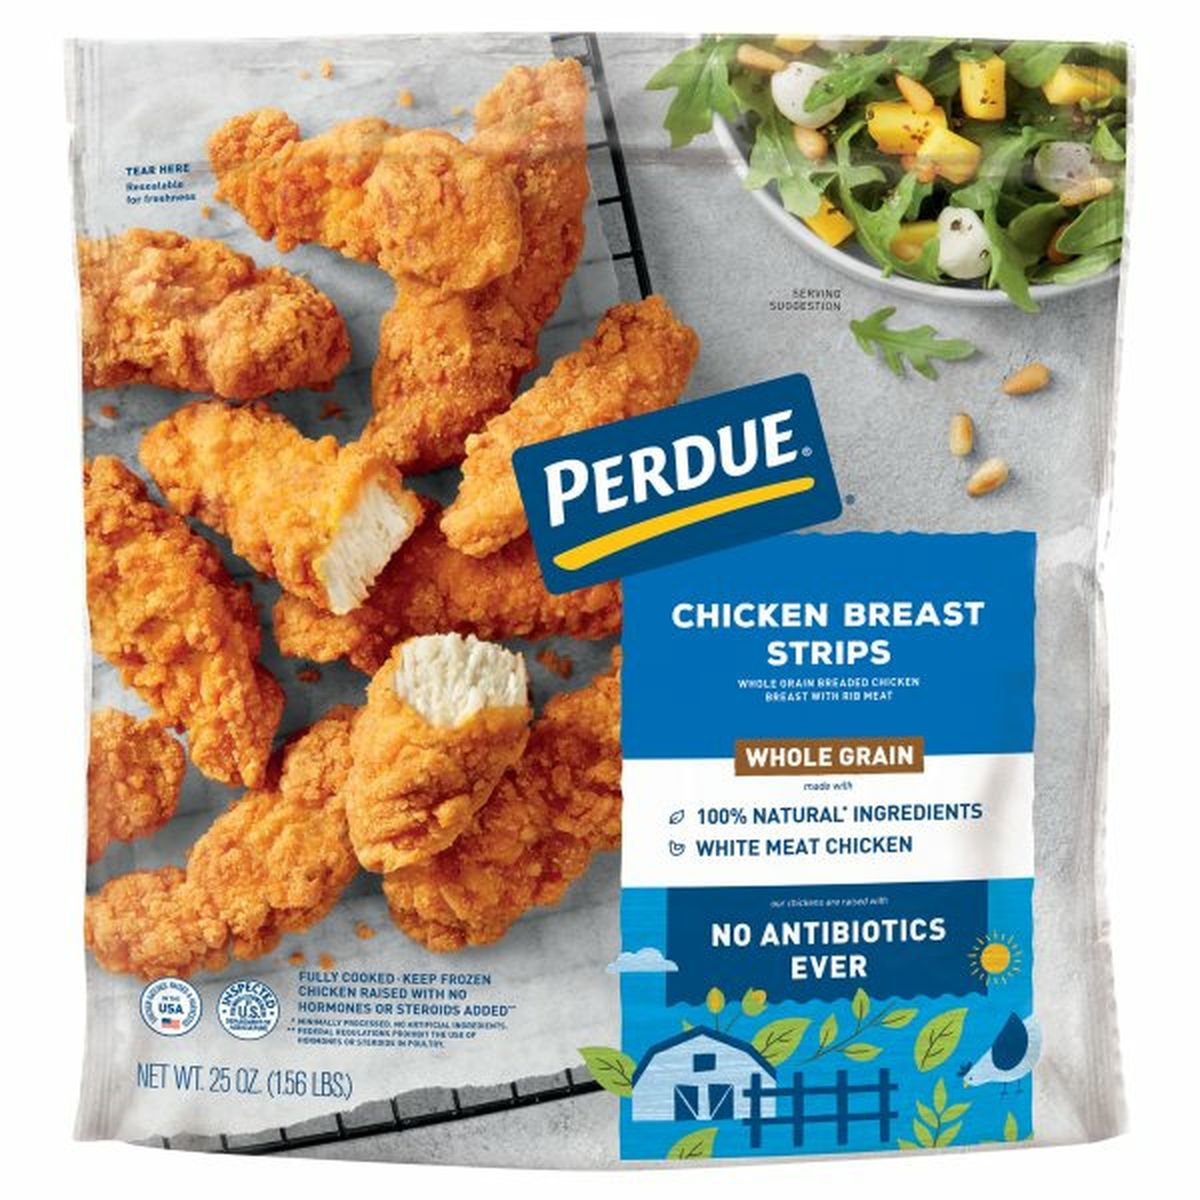 Calories in Perdue Chicken Breast Strips, Whole Grain